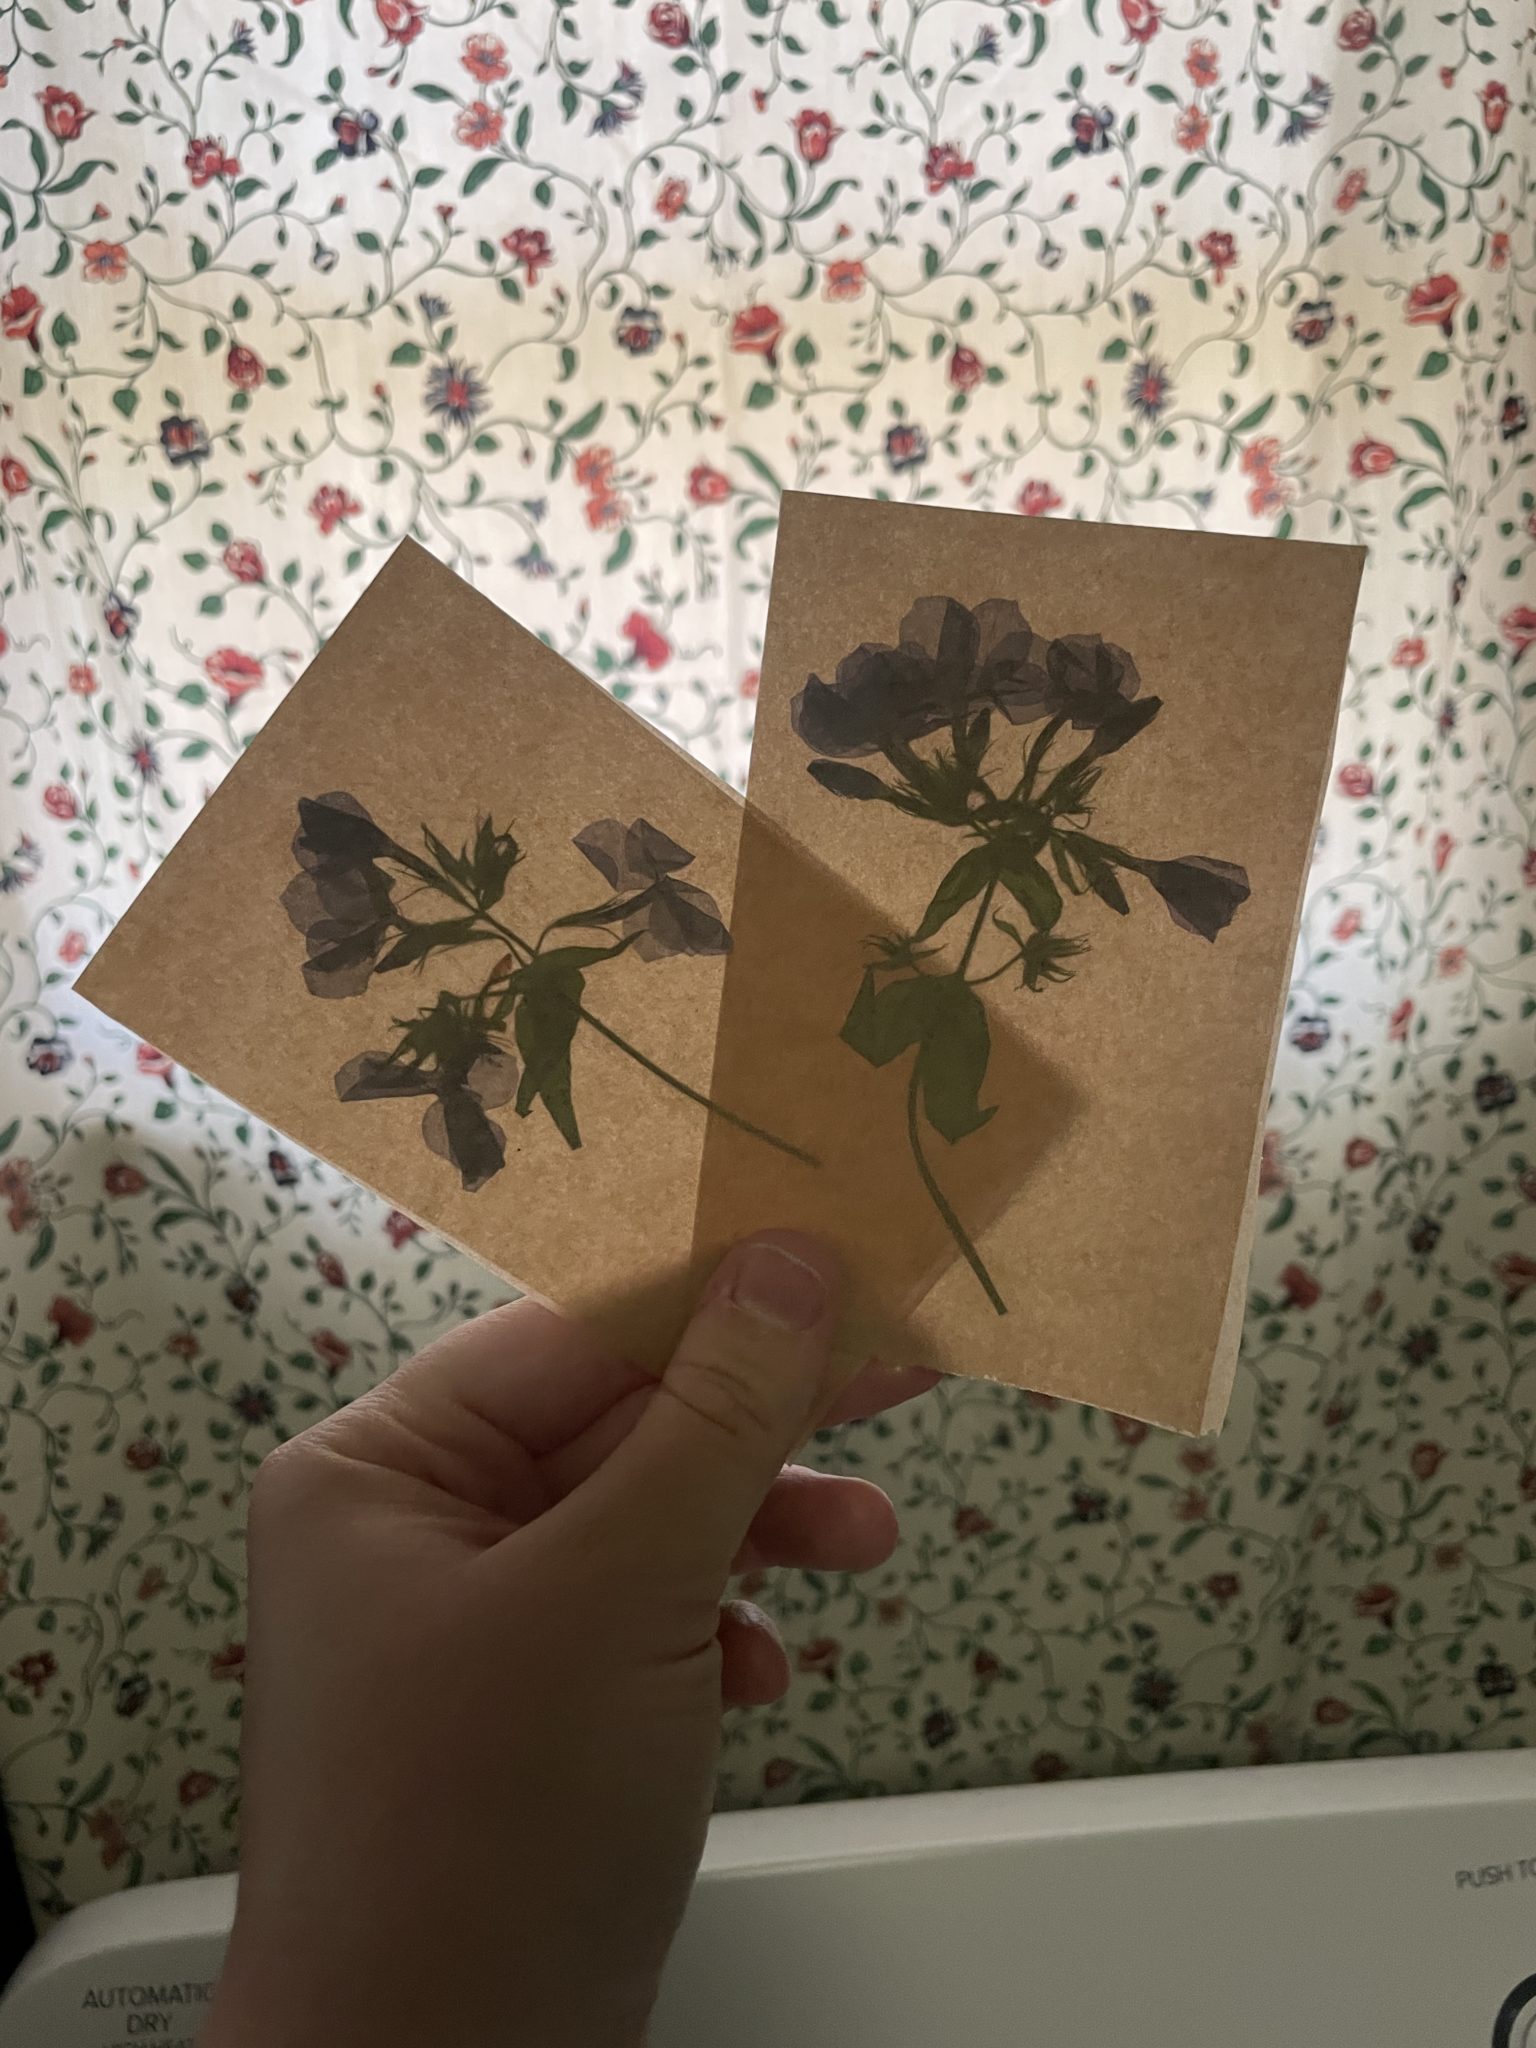 Photo of a white hand holding two fused pieces of waxed paper up to the light coming in through a curtained window. The light filters through the waxed paper to reveal the silhouette of two pressed phlox blooms (one per piece of fused waxed paper).